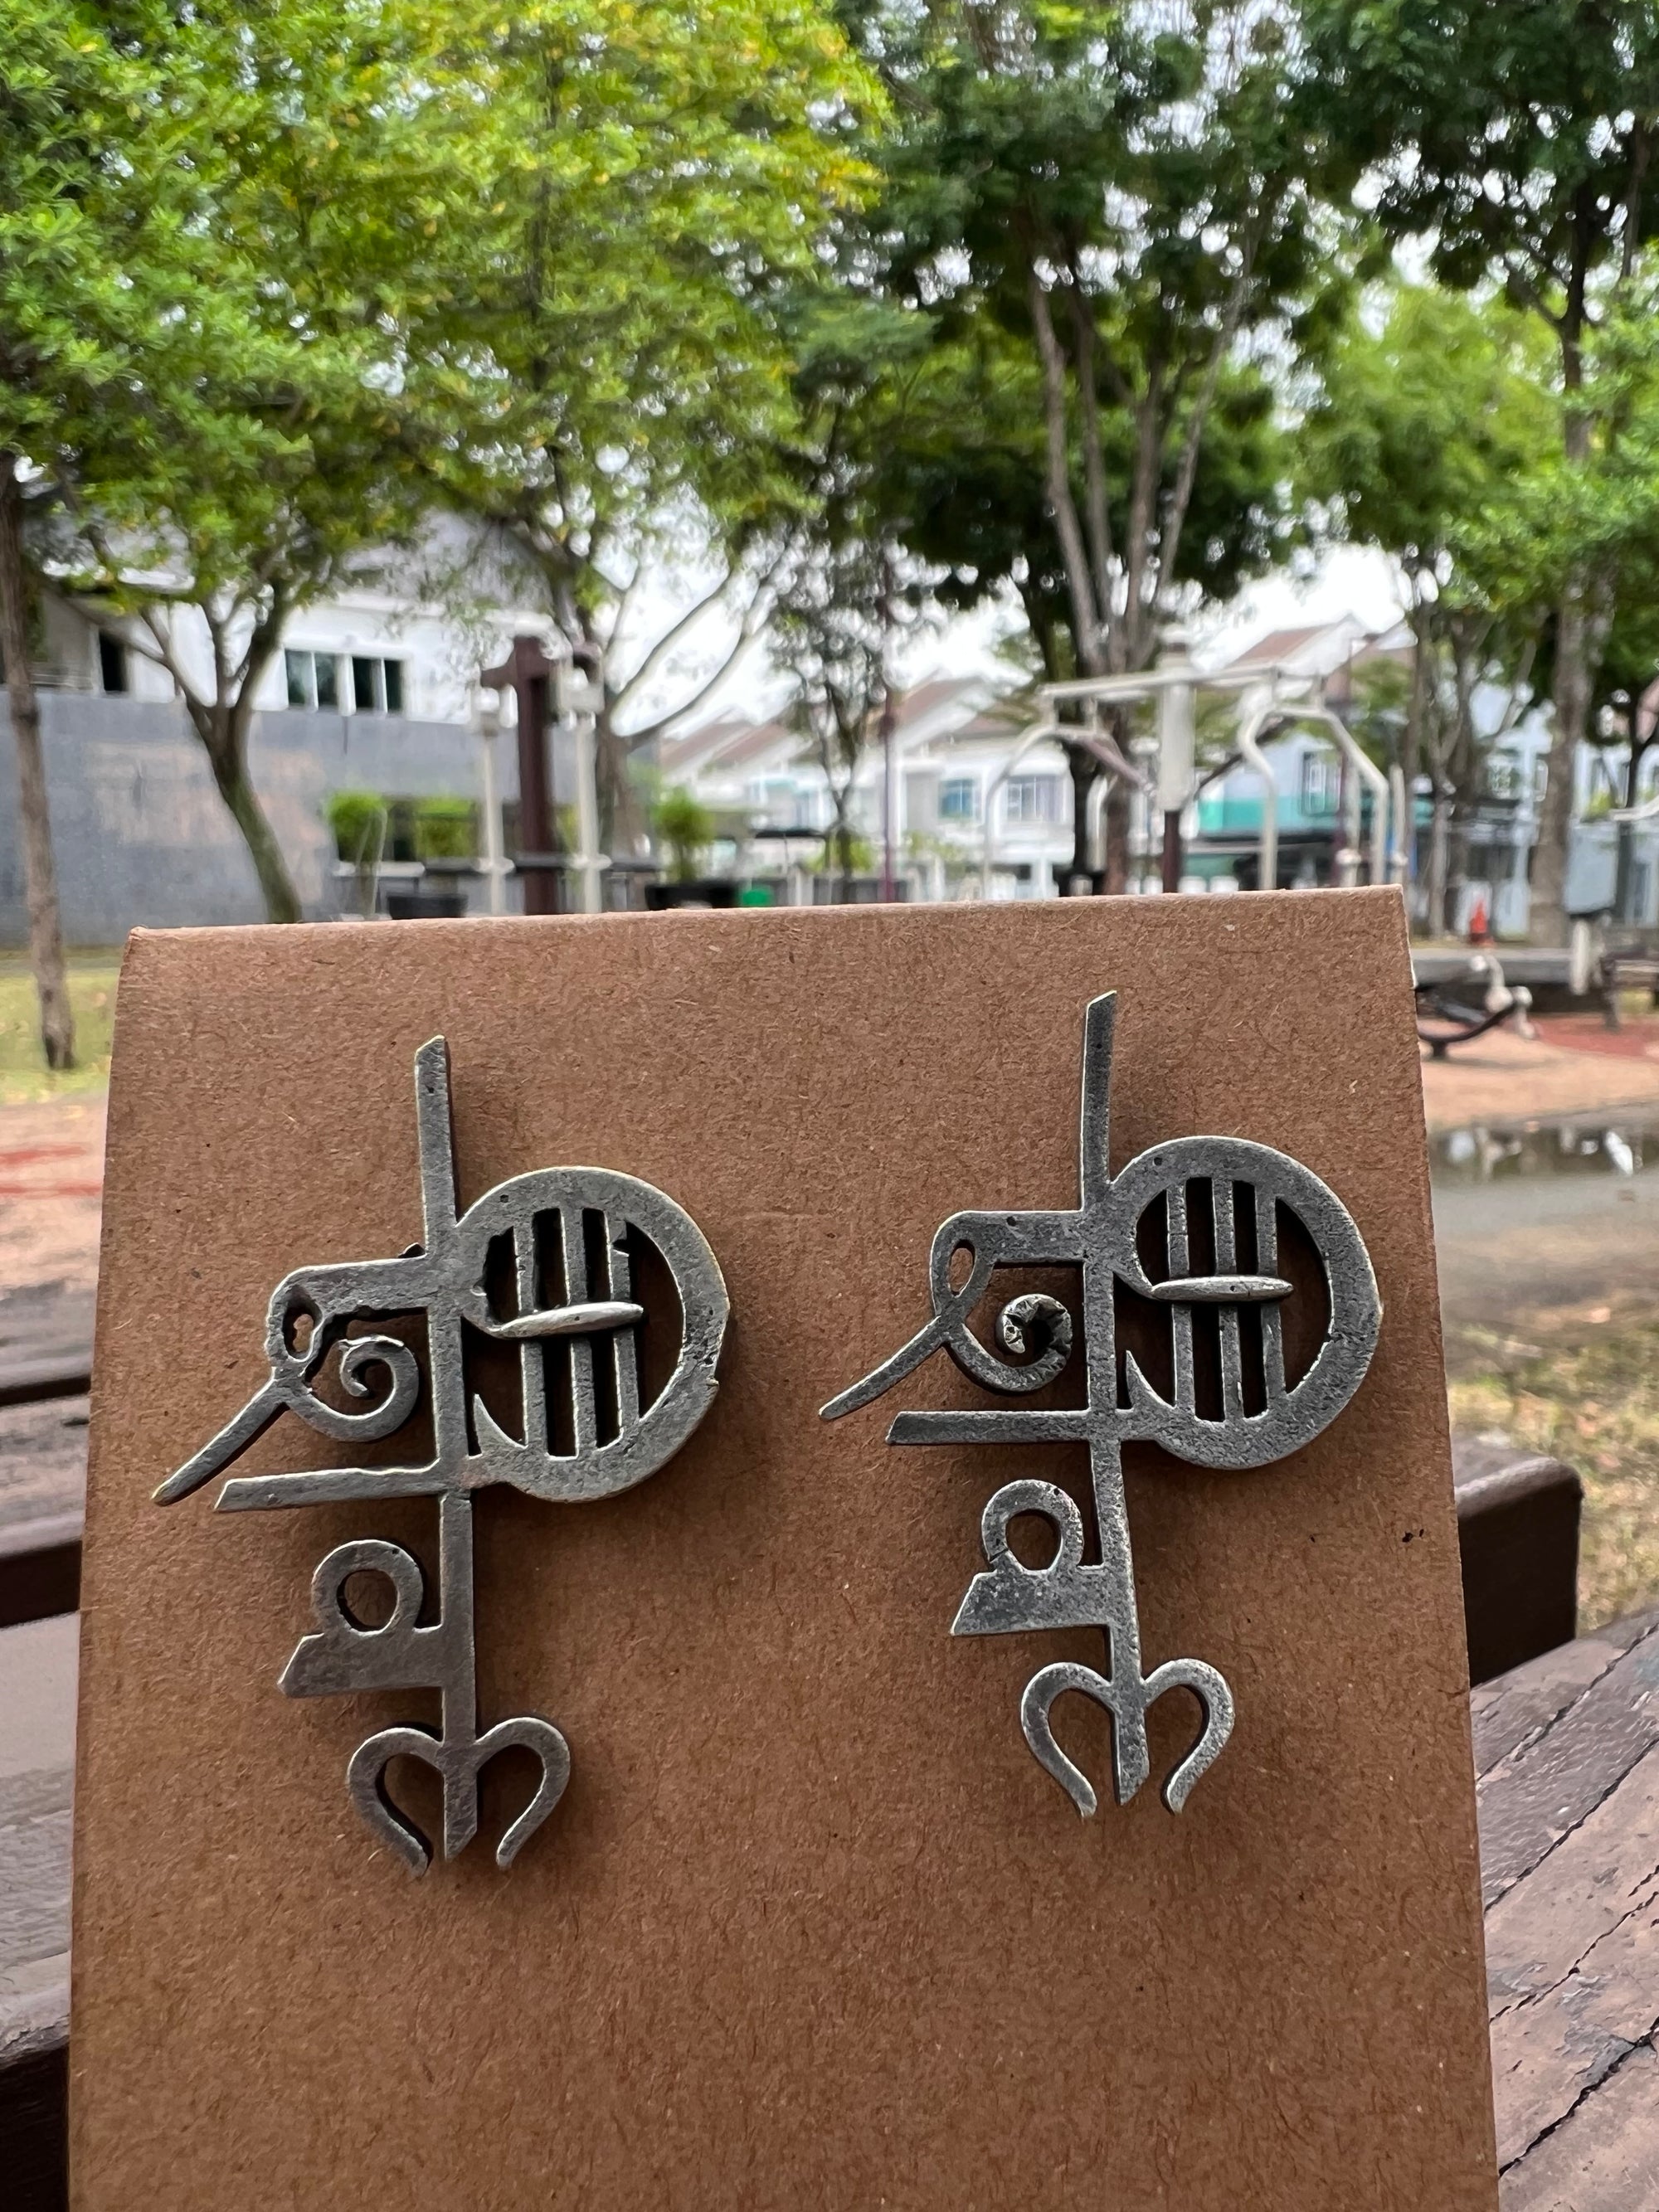 Oxidized silver (Sulam statement jewelry earrings )